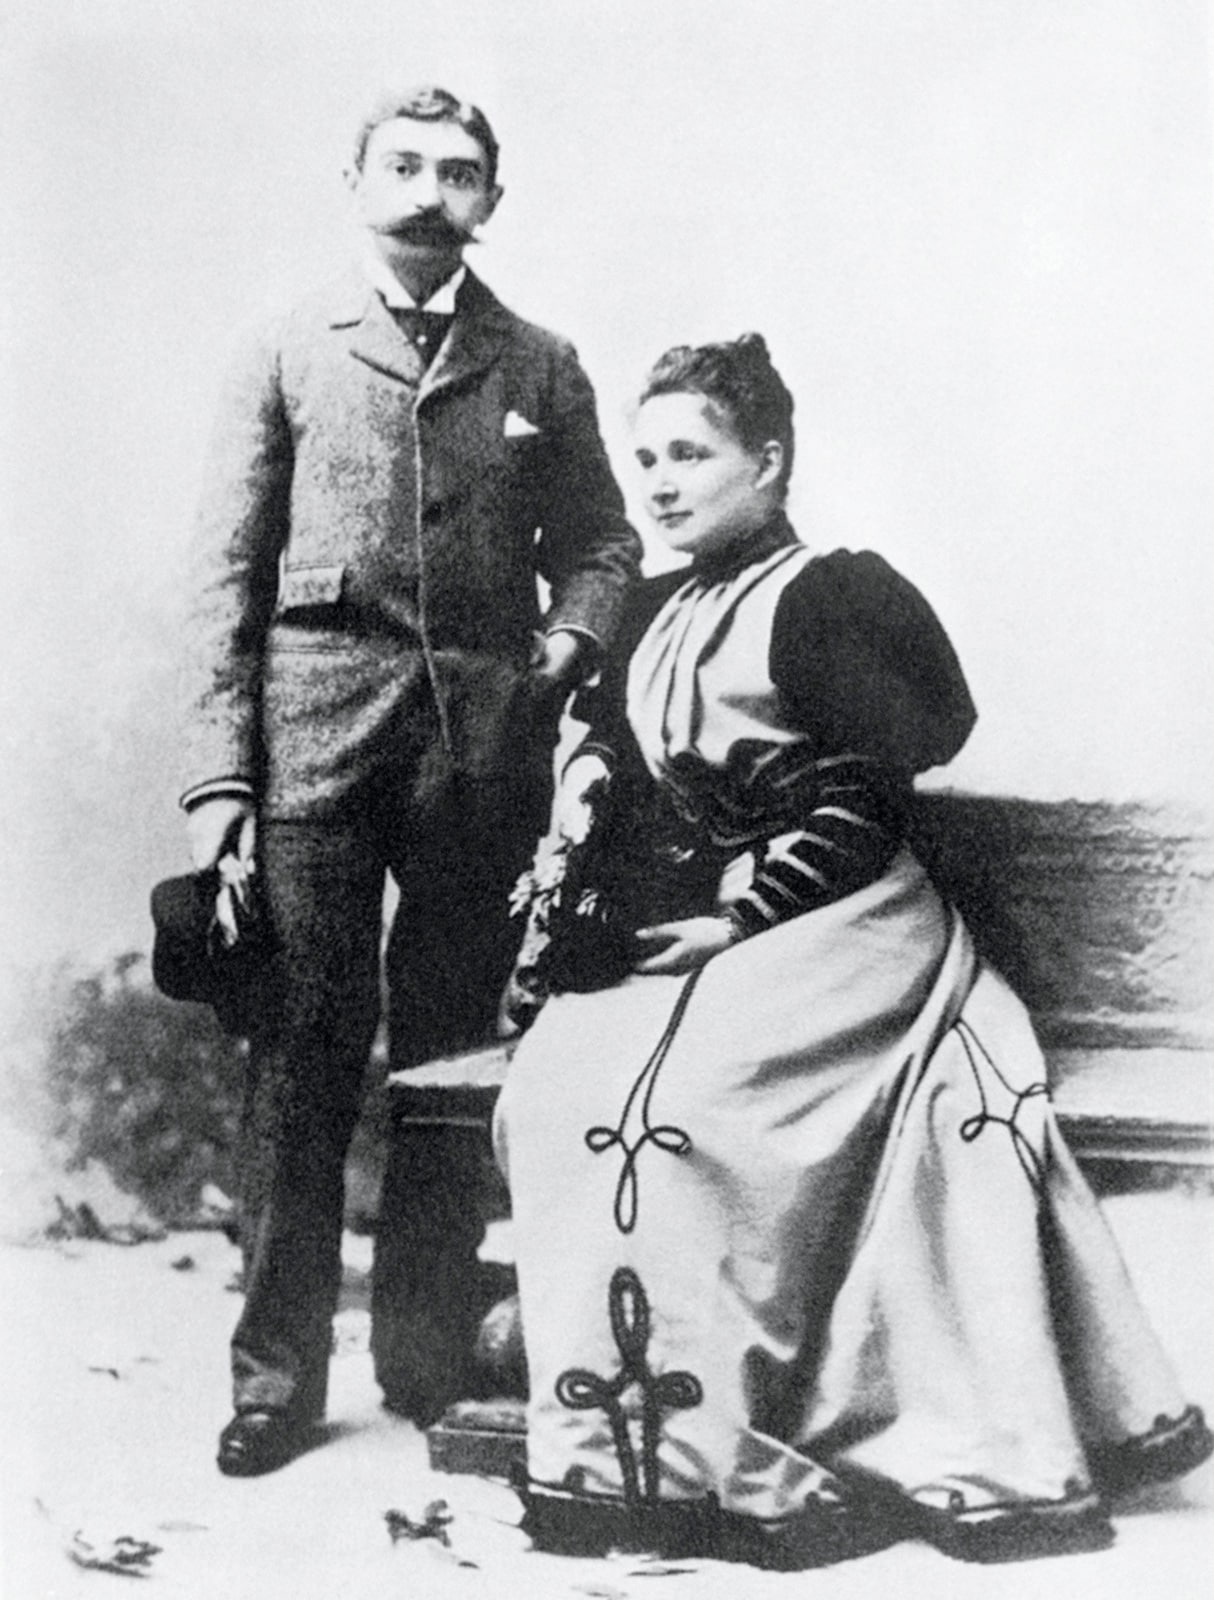  Baron Pierre de COUBERTIN and Marie ROTHAN on their wedding day.